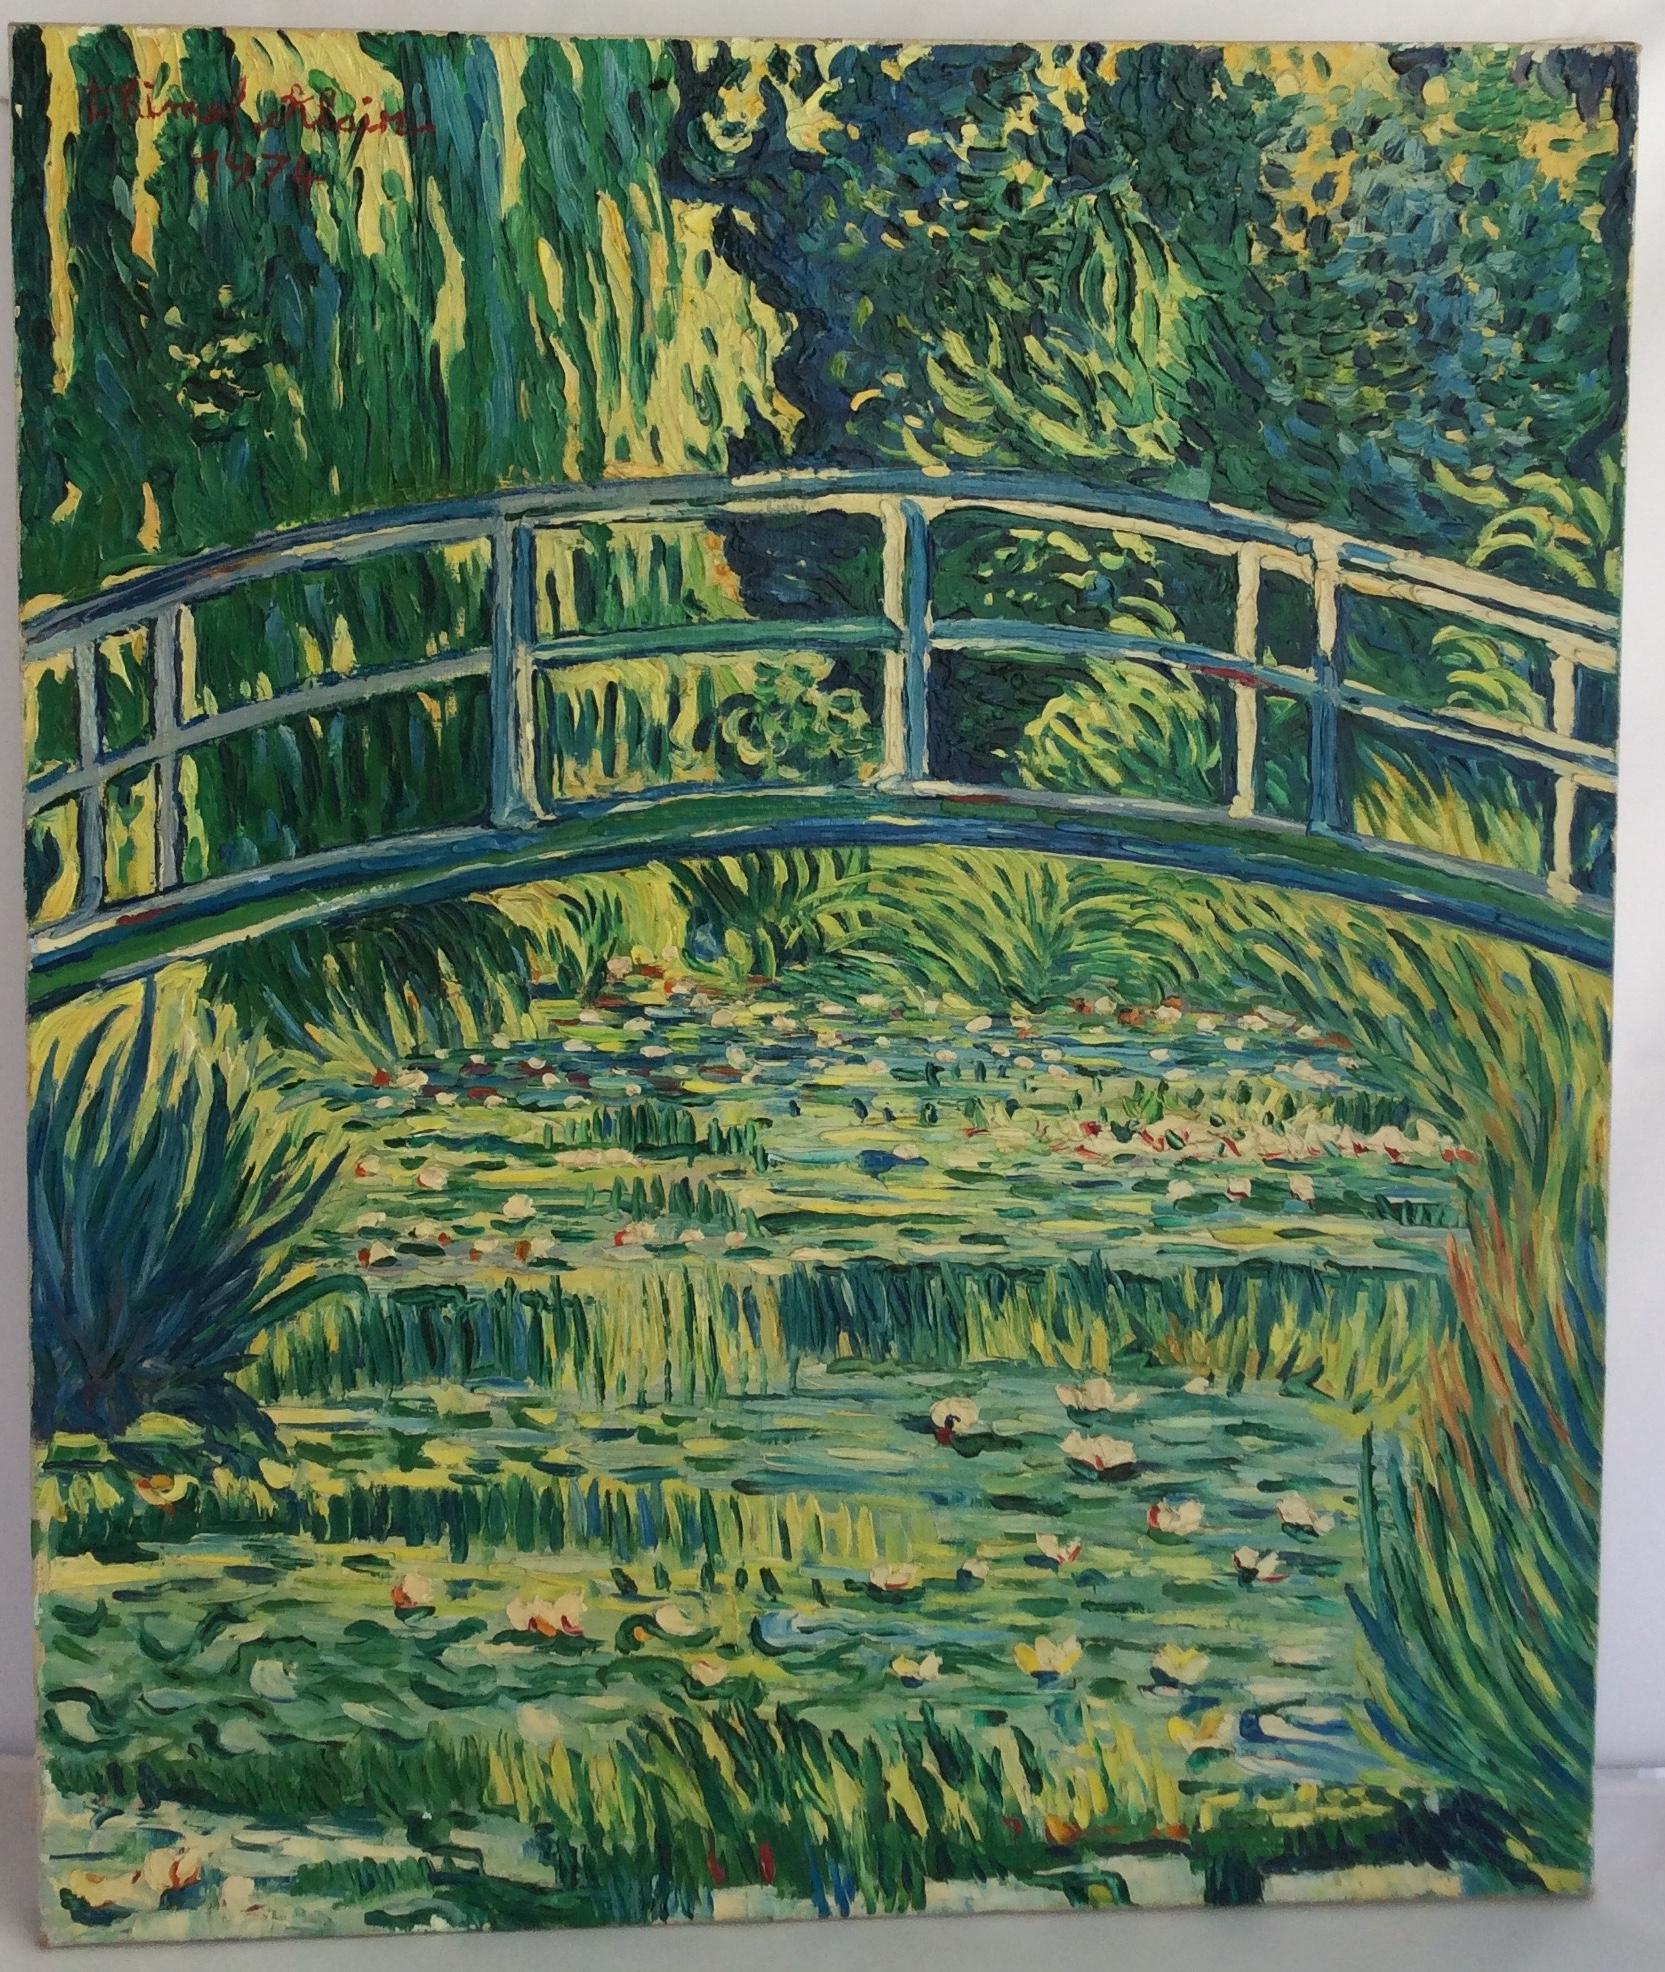 Beautiful original oil on canvas after Monet's Water Lillies. Painted by very talented artist Alain Thimel, titled 